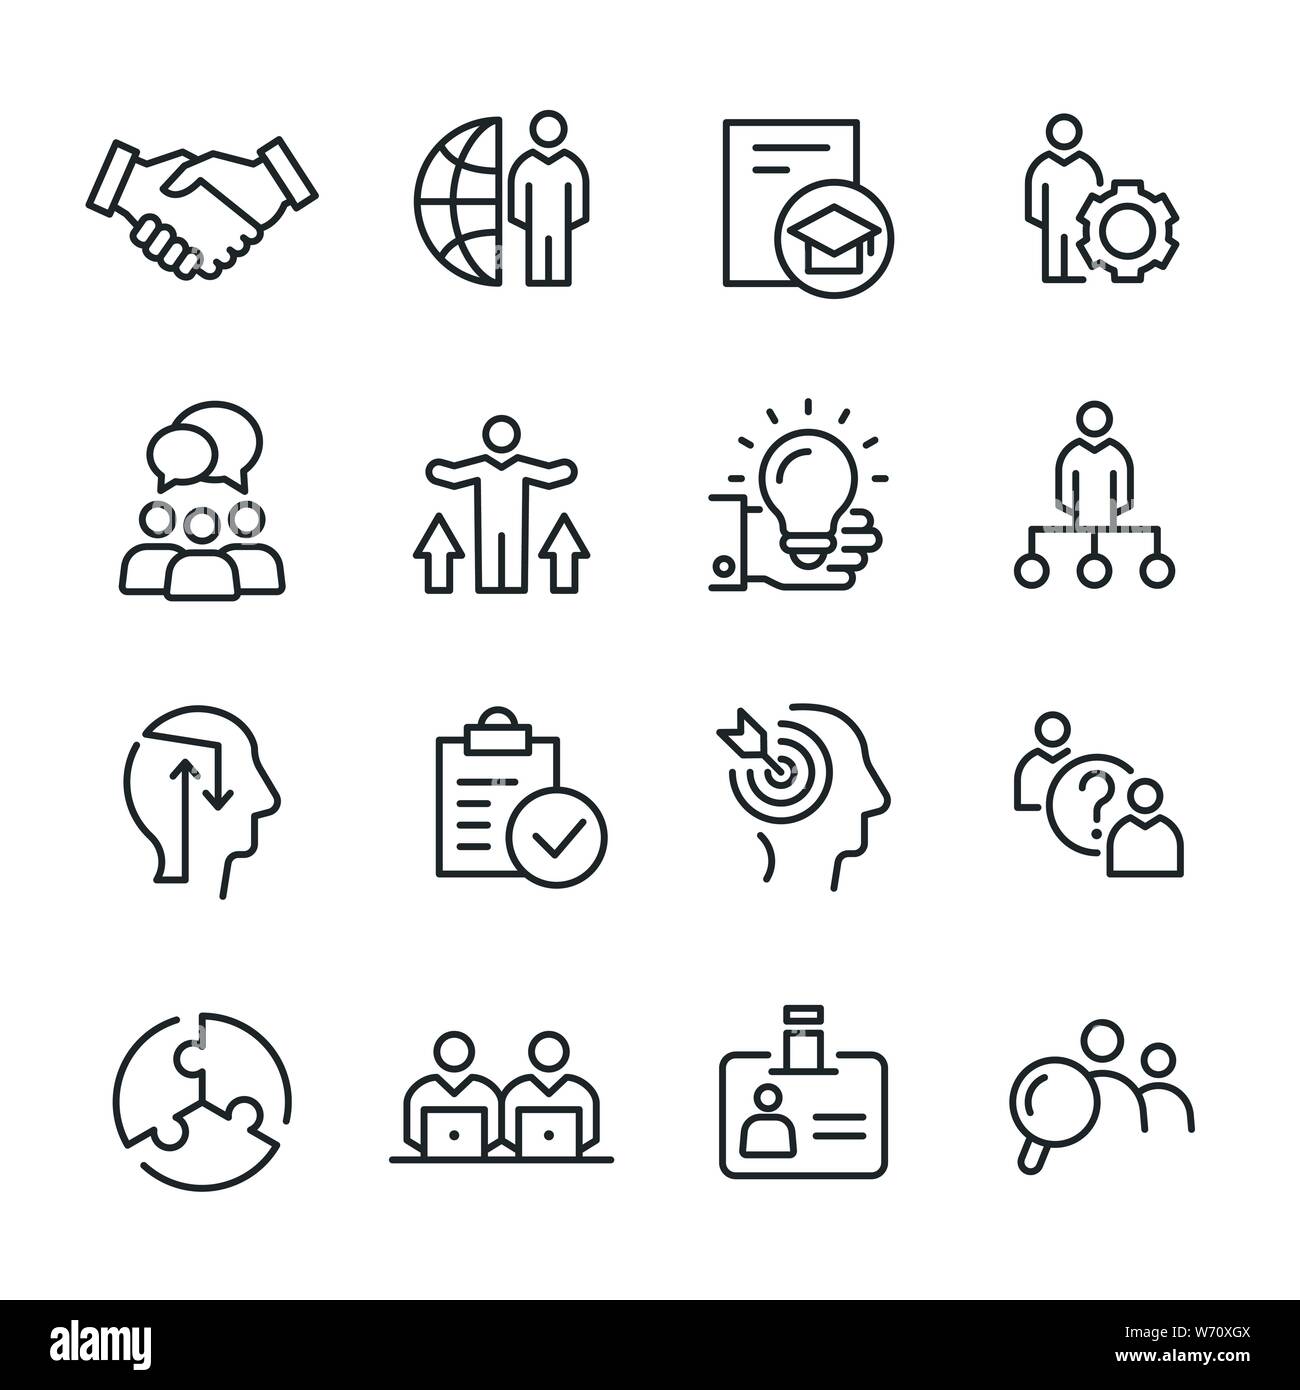 Creative Modern Swoosh Logo Icon Set Business Consulting Vector  Illustration Stock Illustration - Download Image Now - iStock